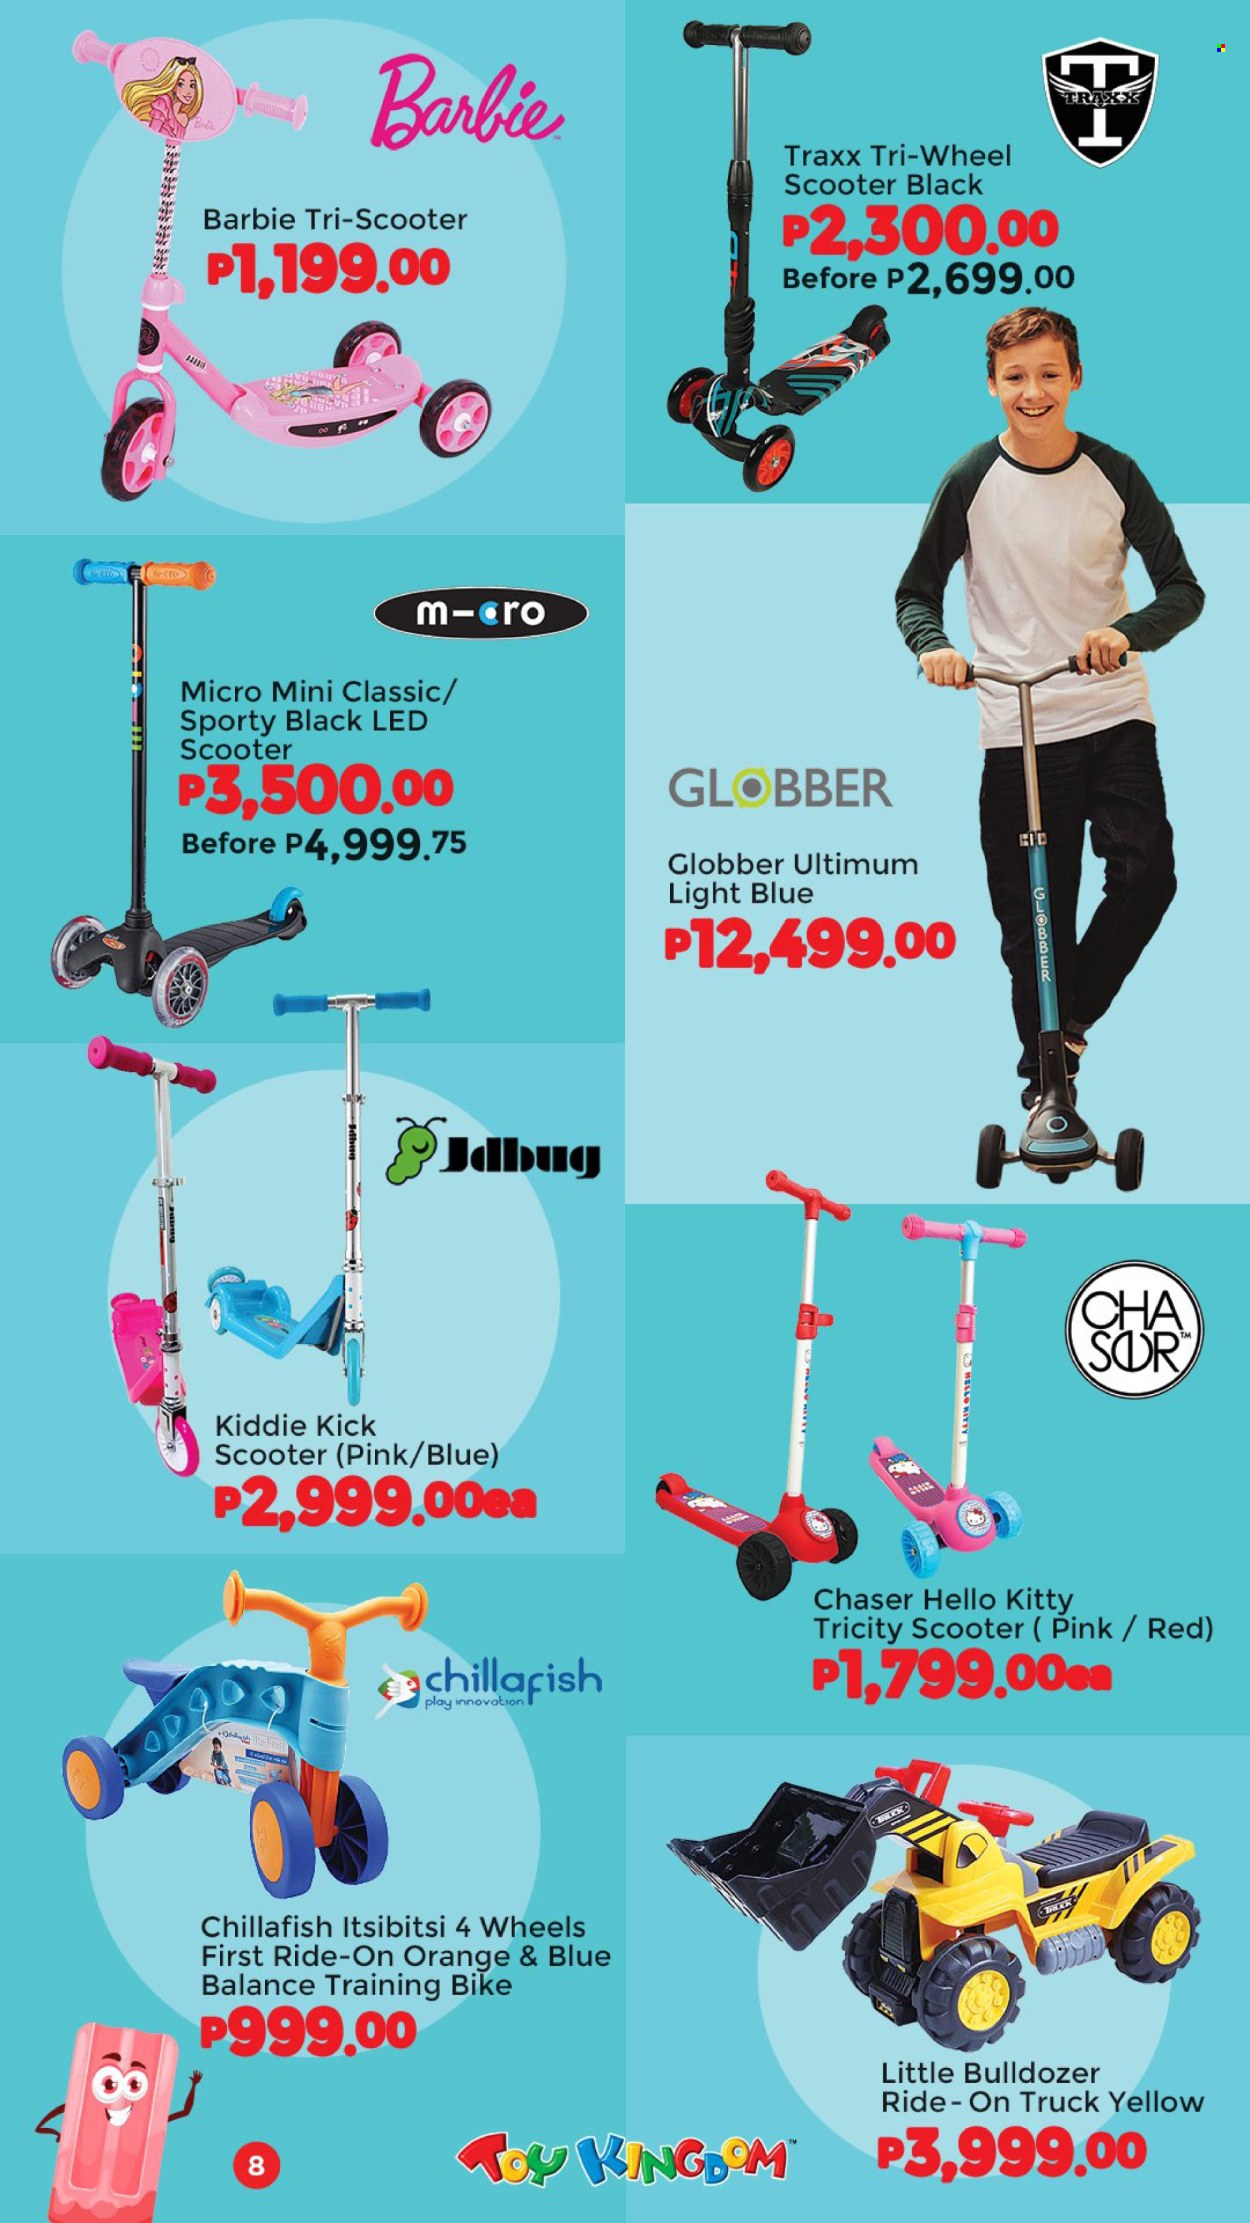 thumbnail - Toy Kingdom offer  - Sales products - Barbie, Hello Kitty, bicycle, kick scooter, toys. Page 8.